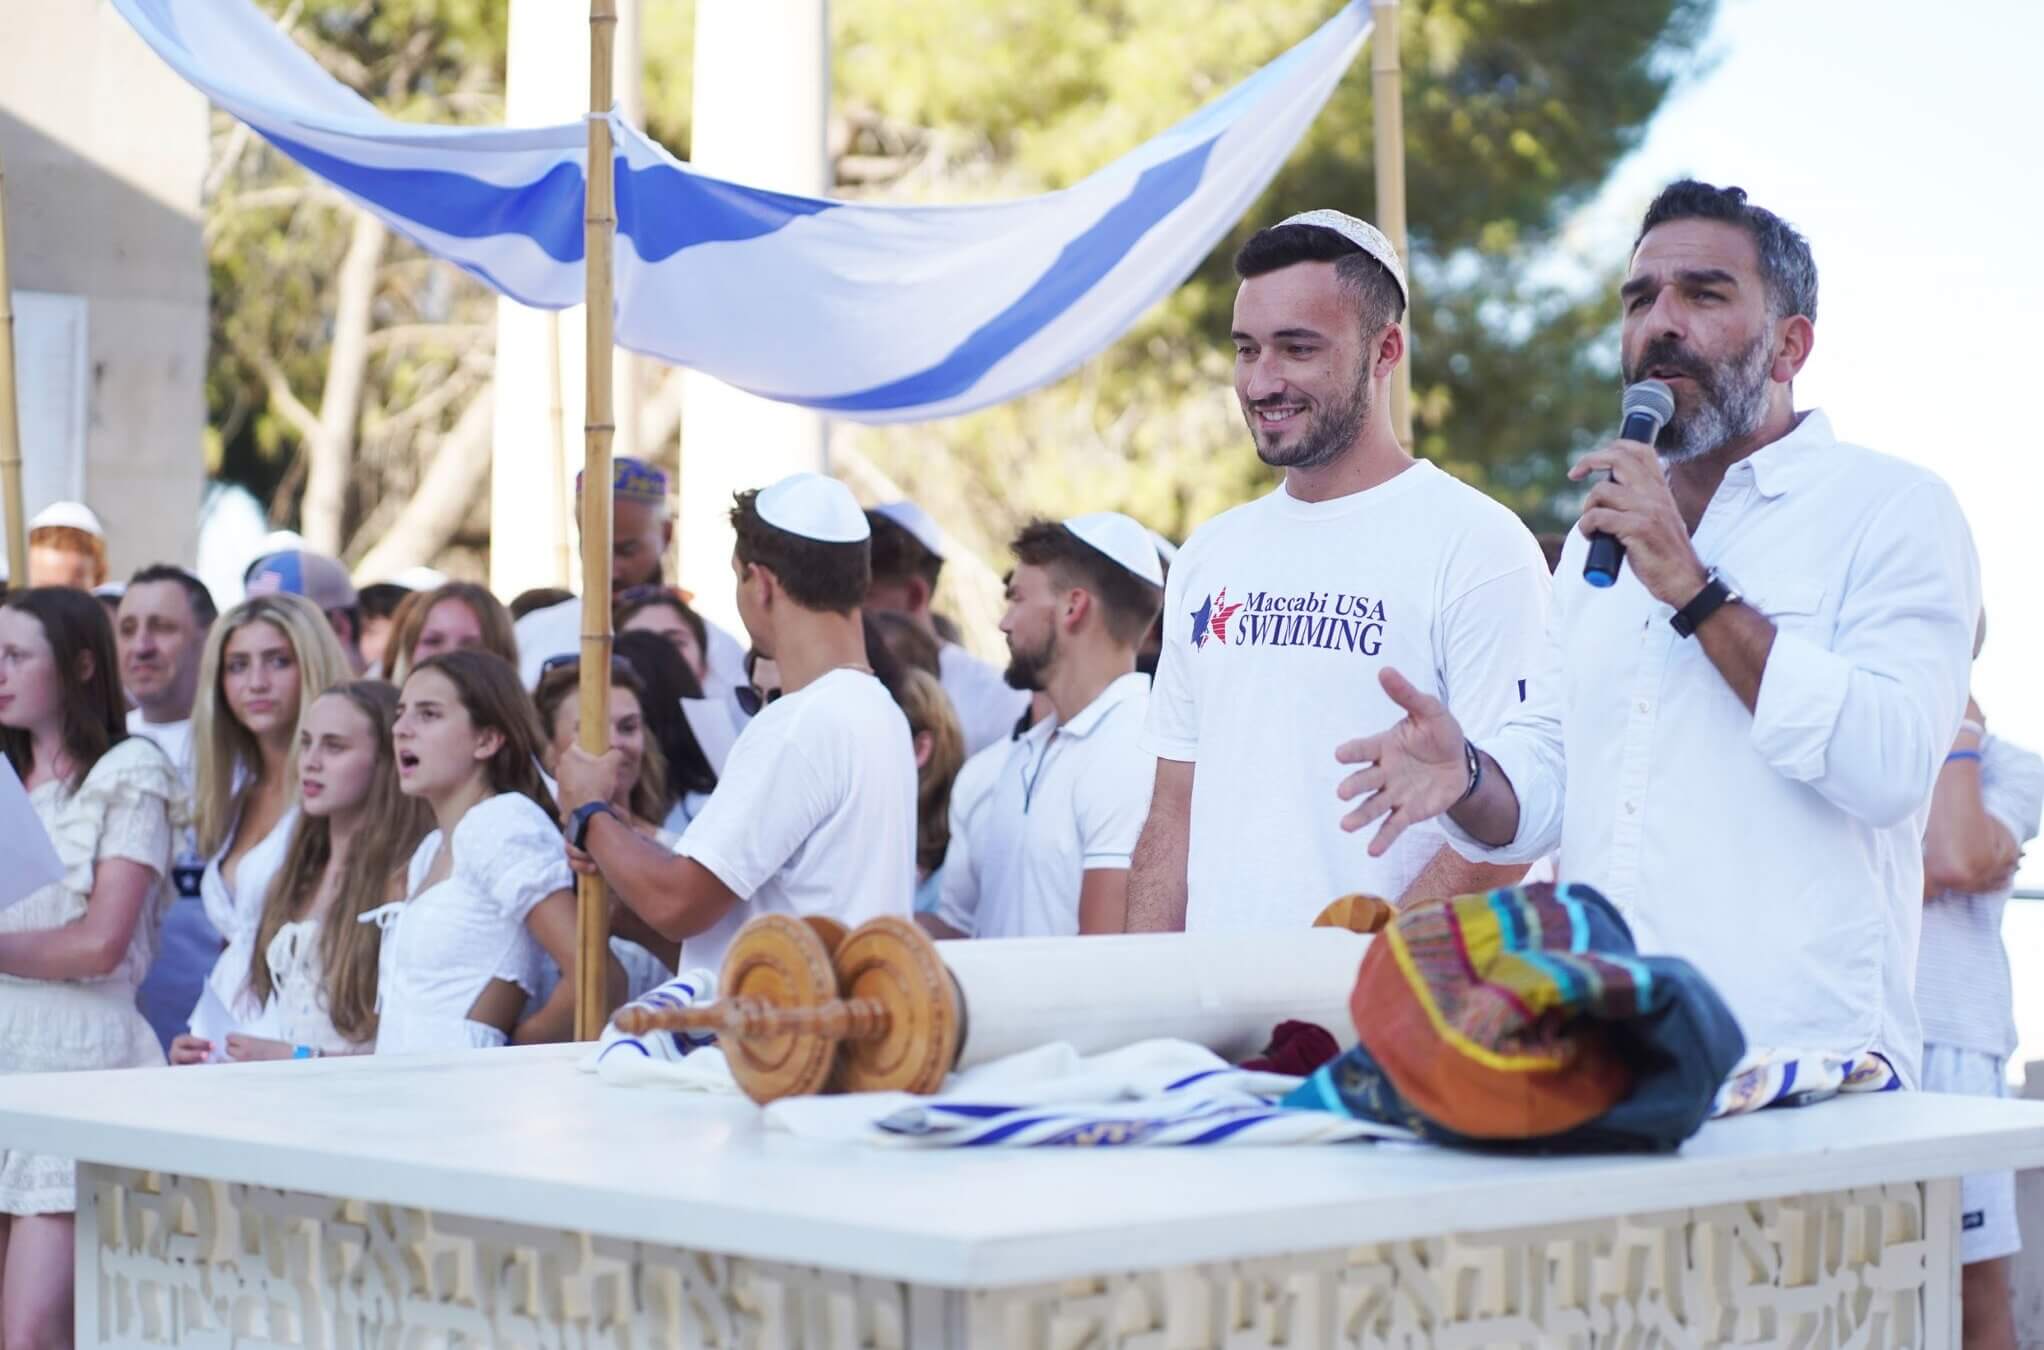 Joshua Fountain (second from right) and Rabbi Leor Sinai (right) at a bar and bat mitzvah ceremony for American Maccabiah athletes who never had one when they were younger, at the Mt. Scopus campus of The Hebrew University in Jerusalem, July 11, 2022